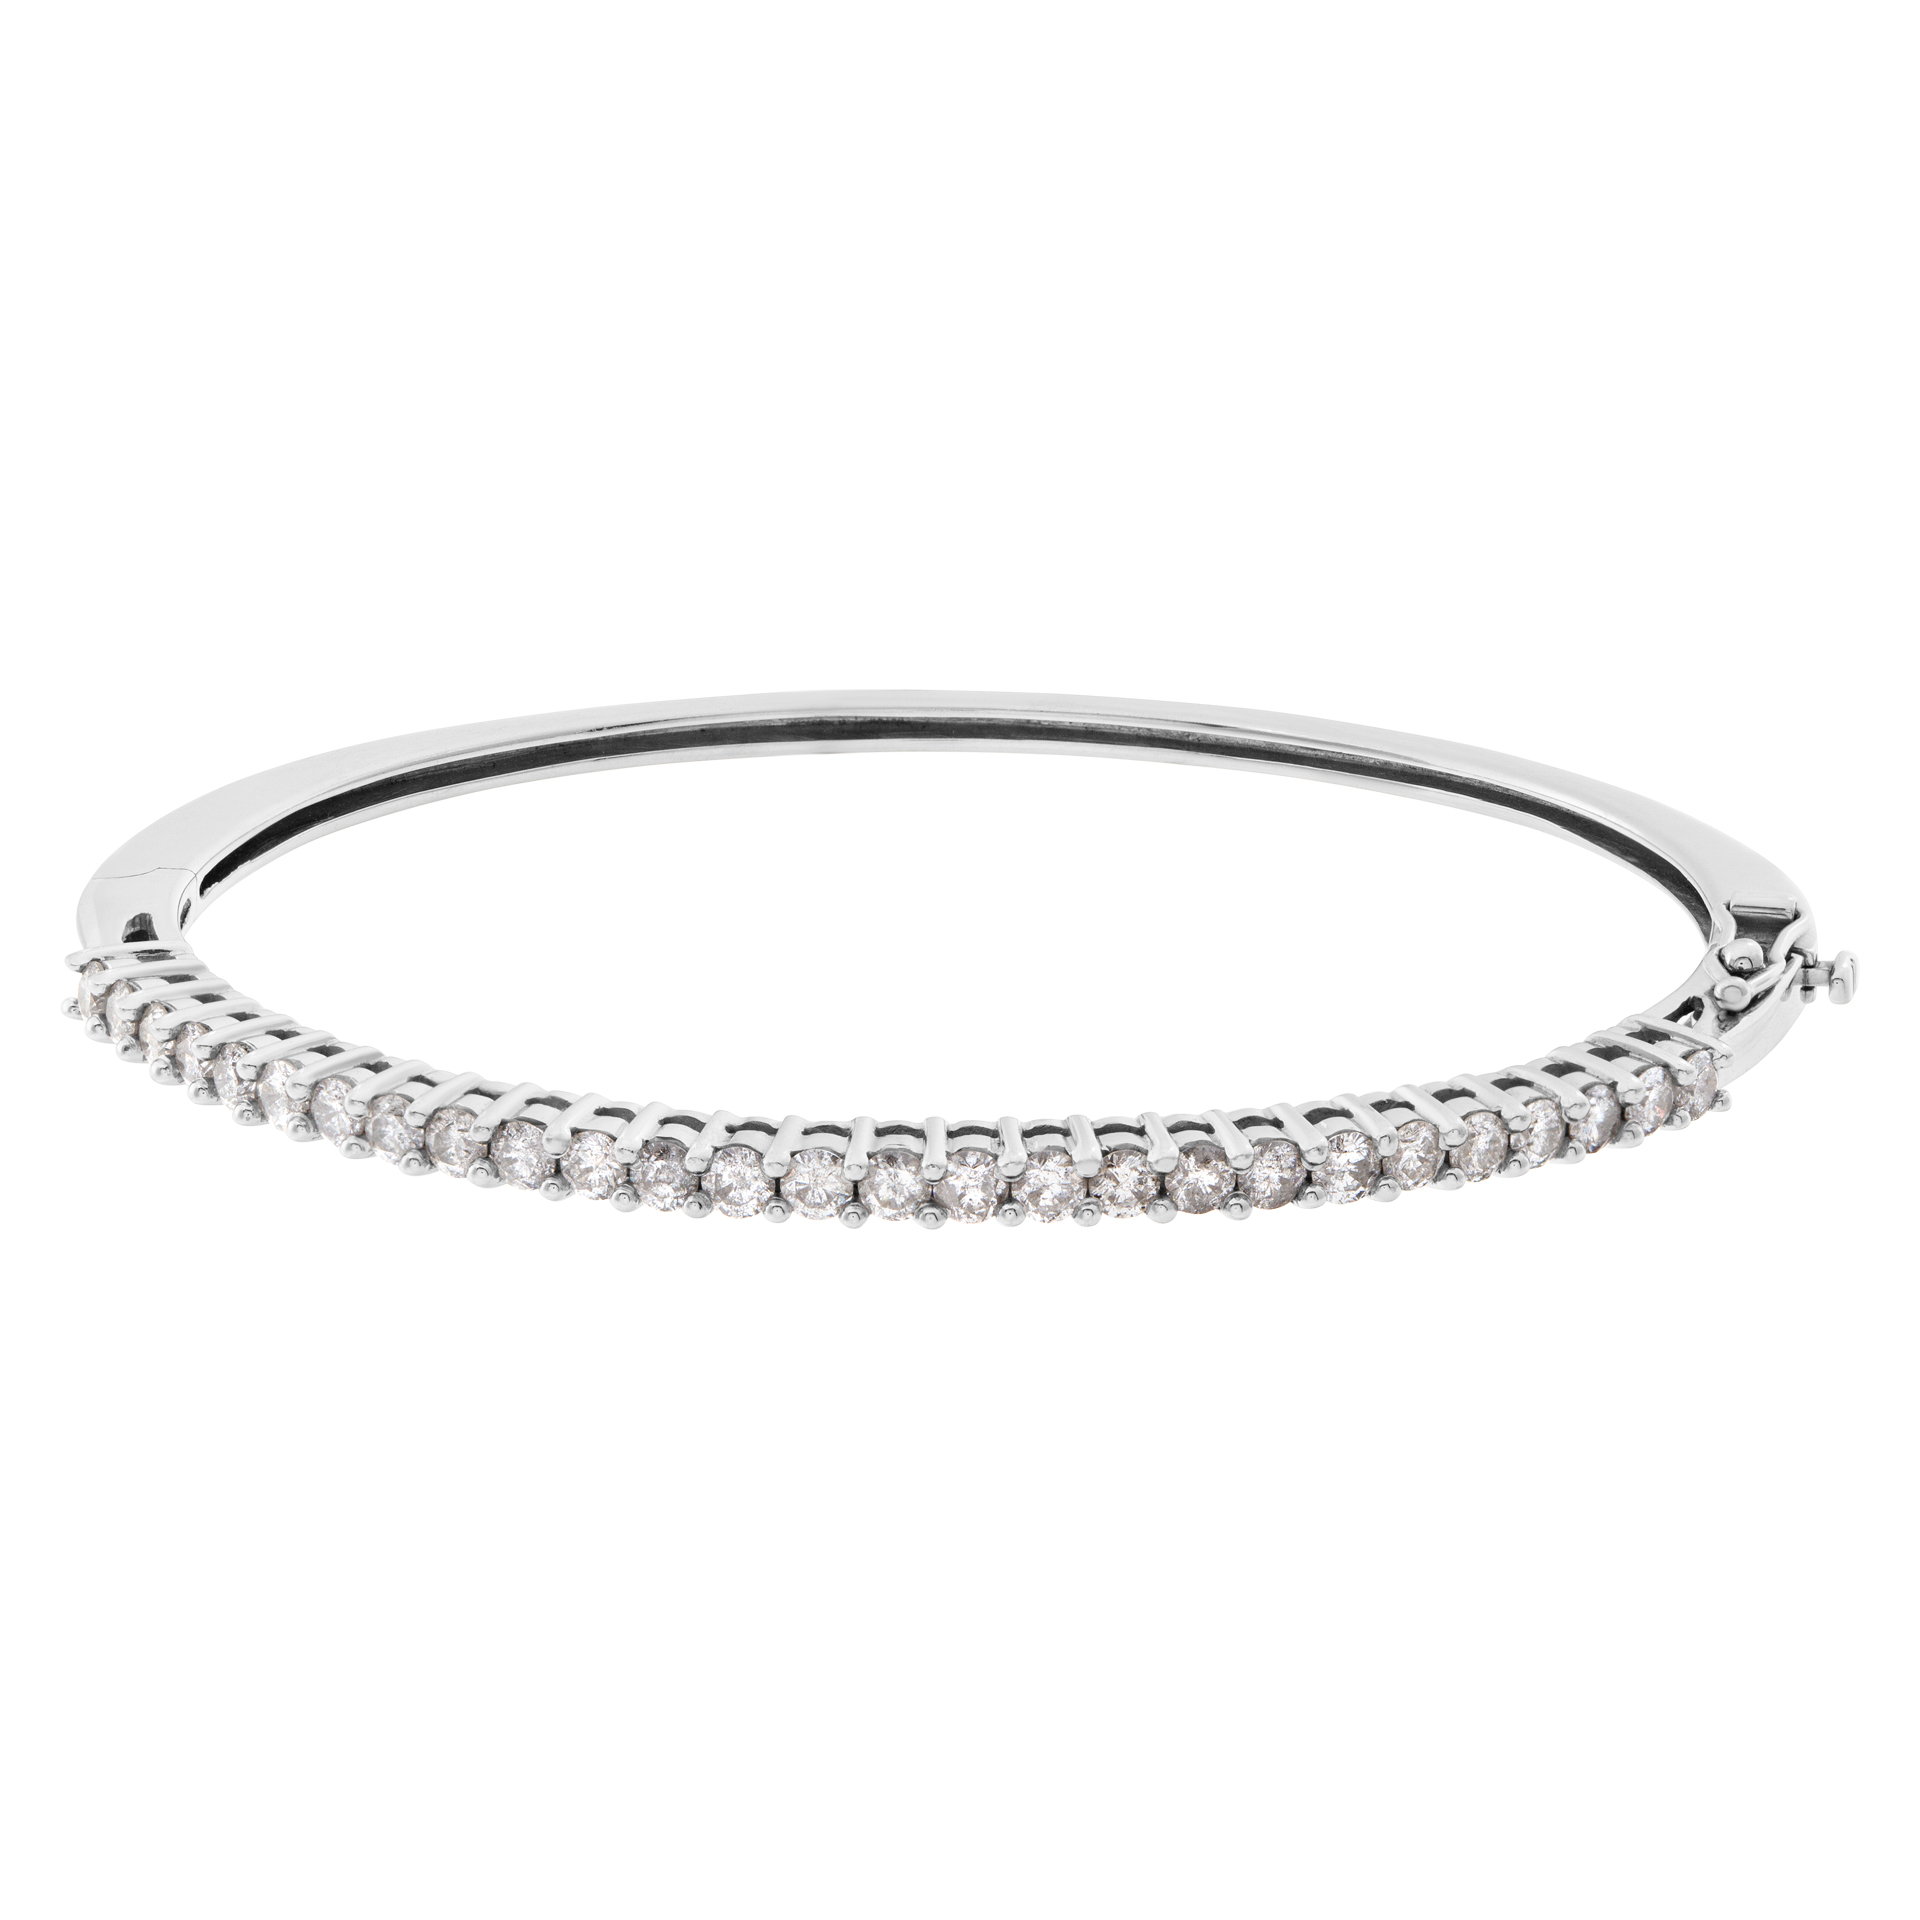 Diamond bangle in 14k white gold with app. 1.80 cts in diamonds